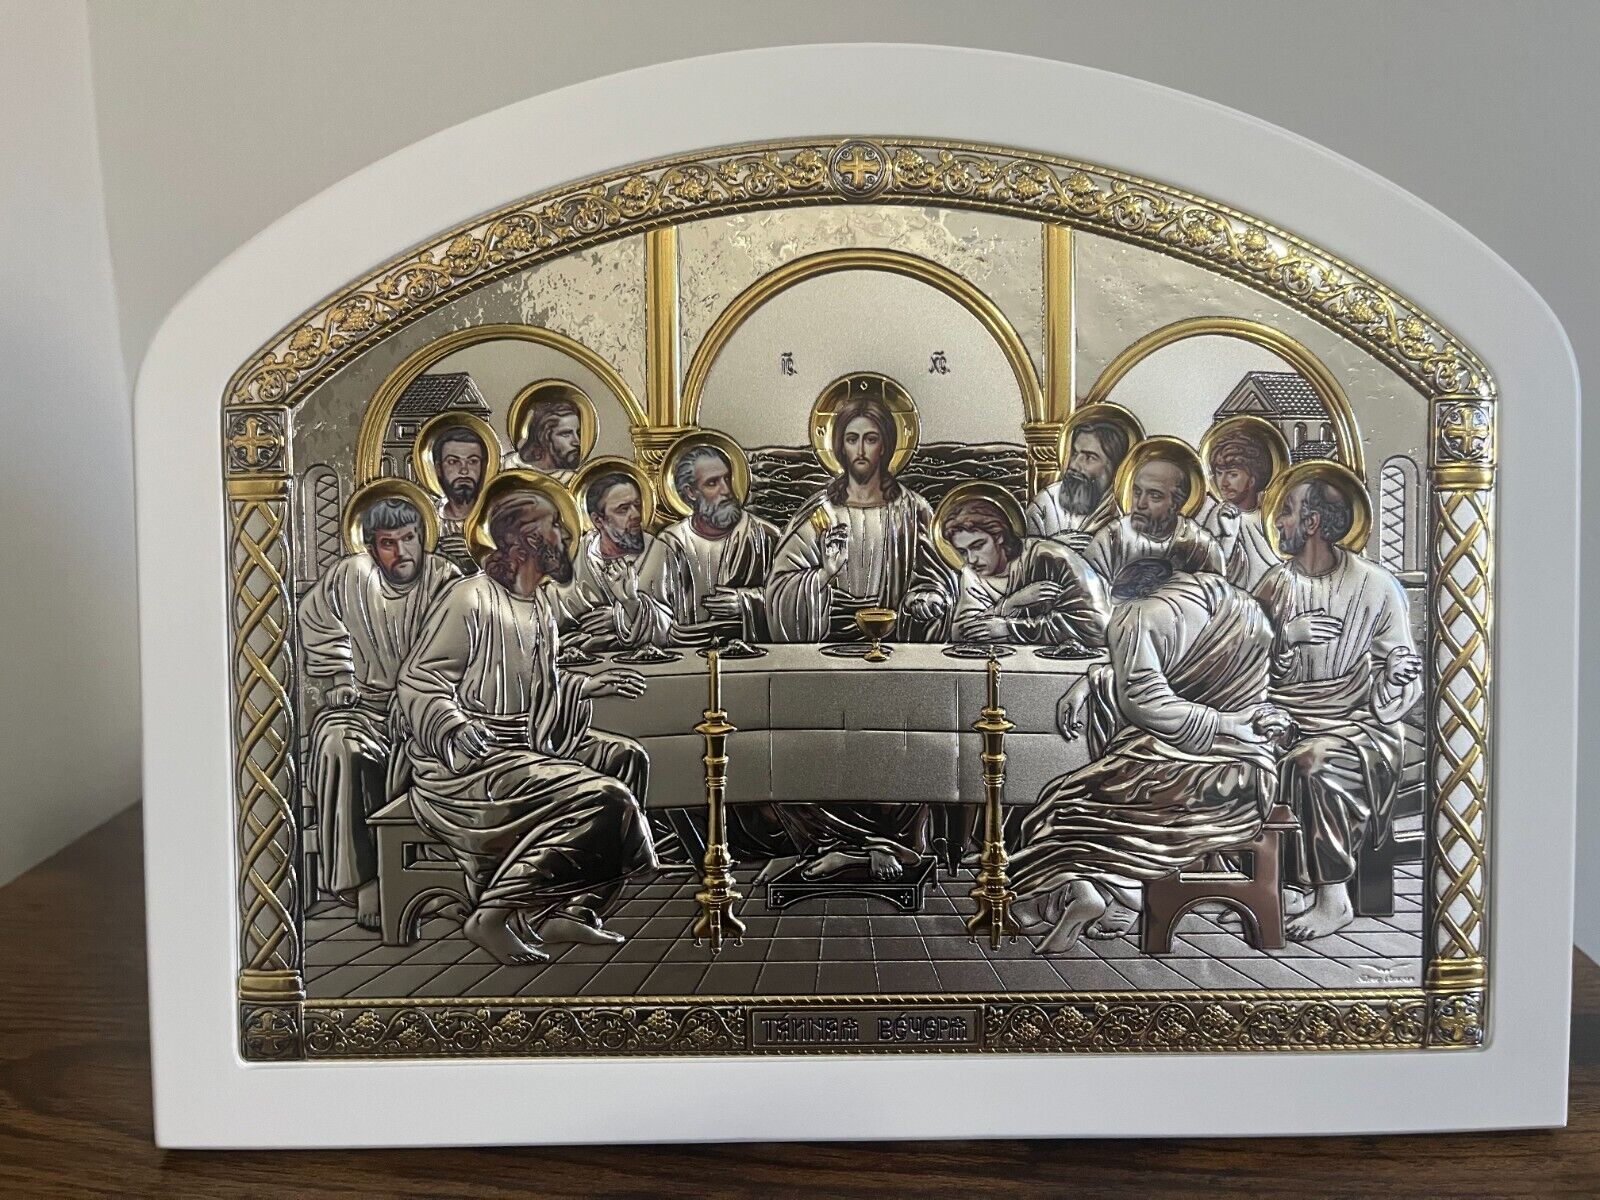  Silver christian orthodox icon, gilded,  Last Supper, 10 x 7 1/2in